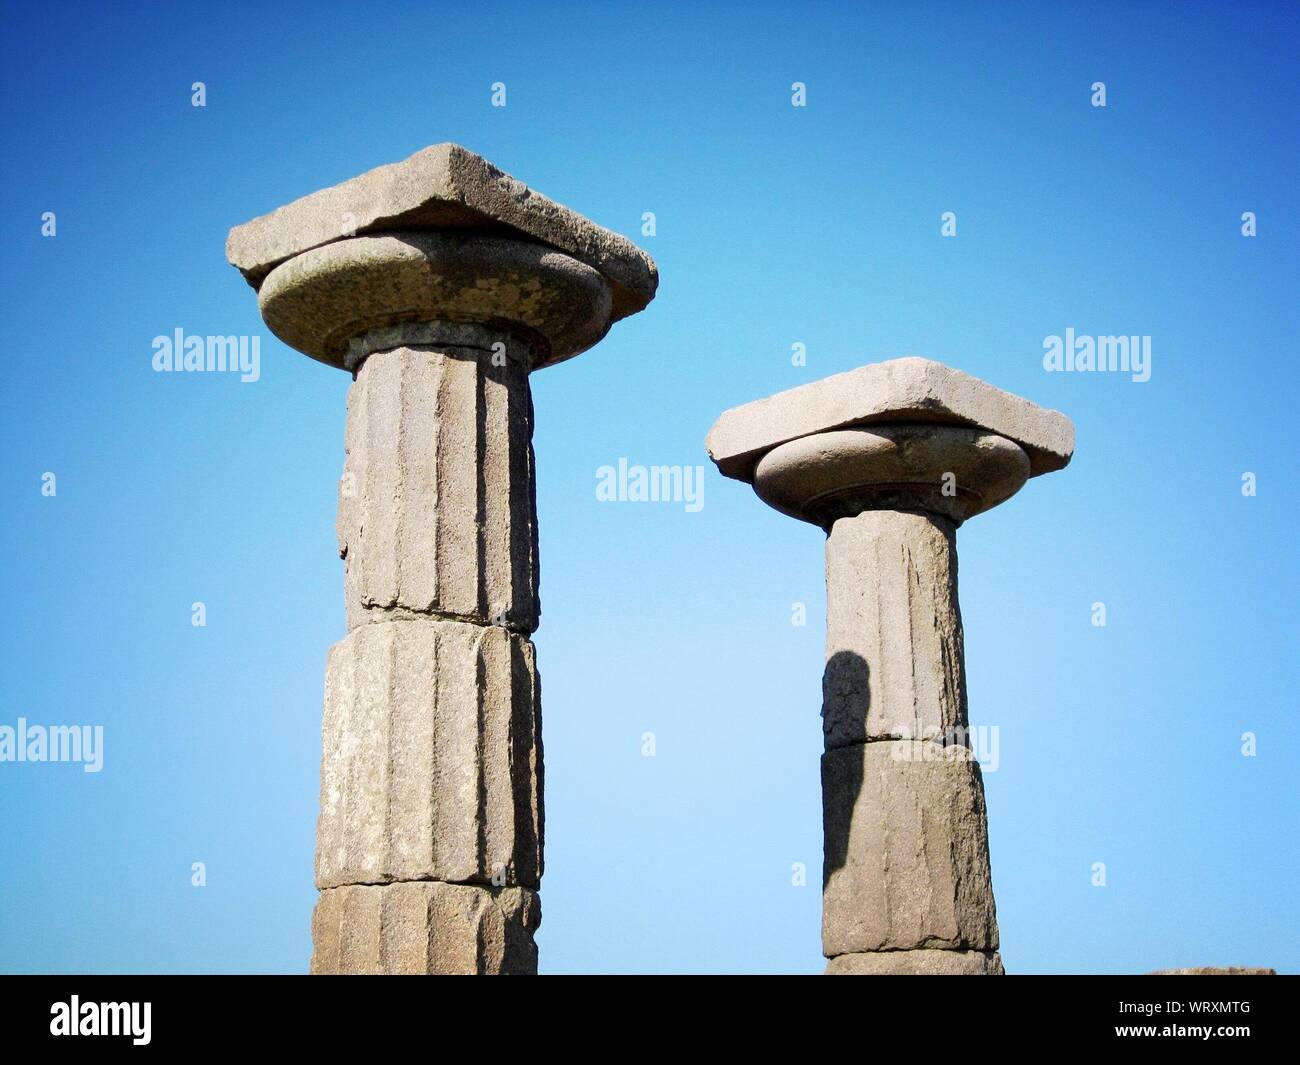 High Section Of Historic Temple Columns Against Clear Blue Sky Stock Photo